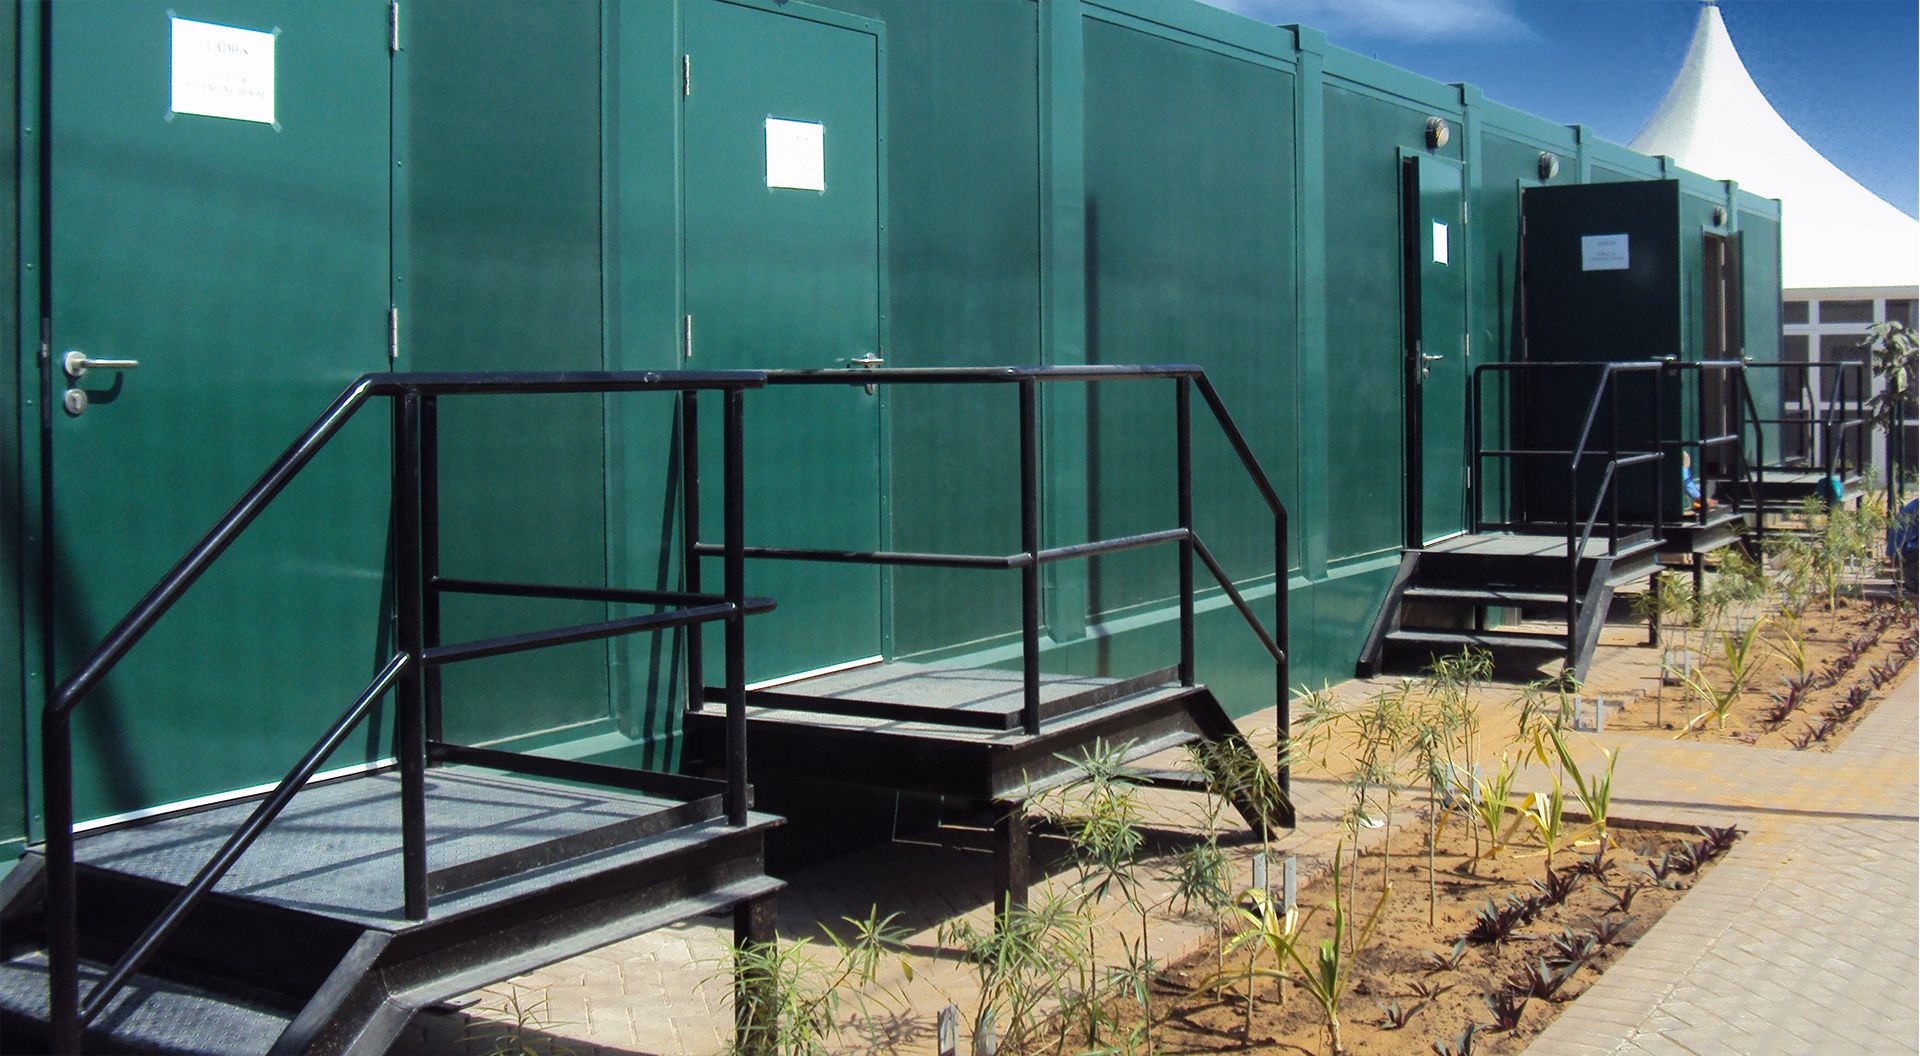 Modular Shipping Container ablution block MFC Concepts